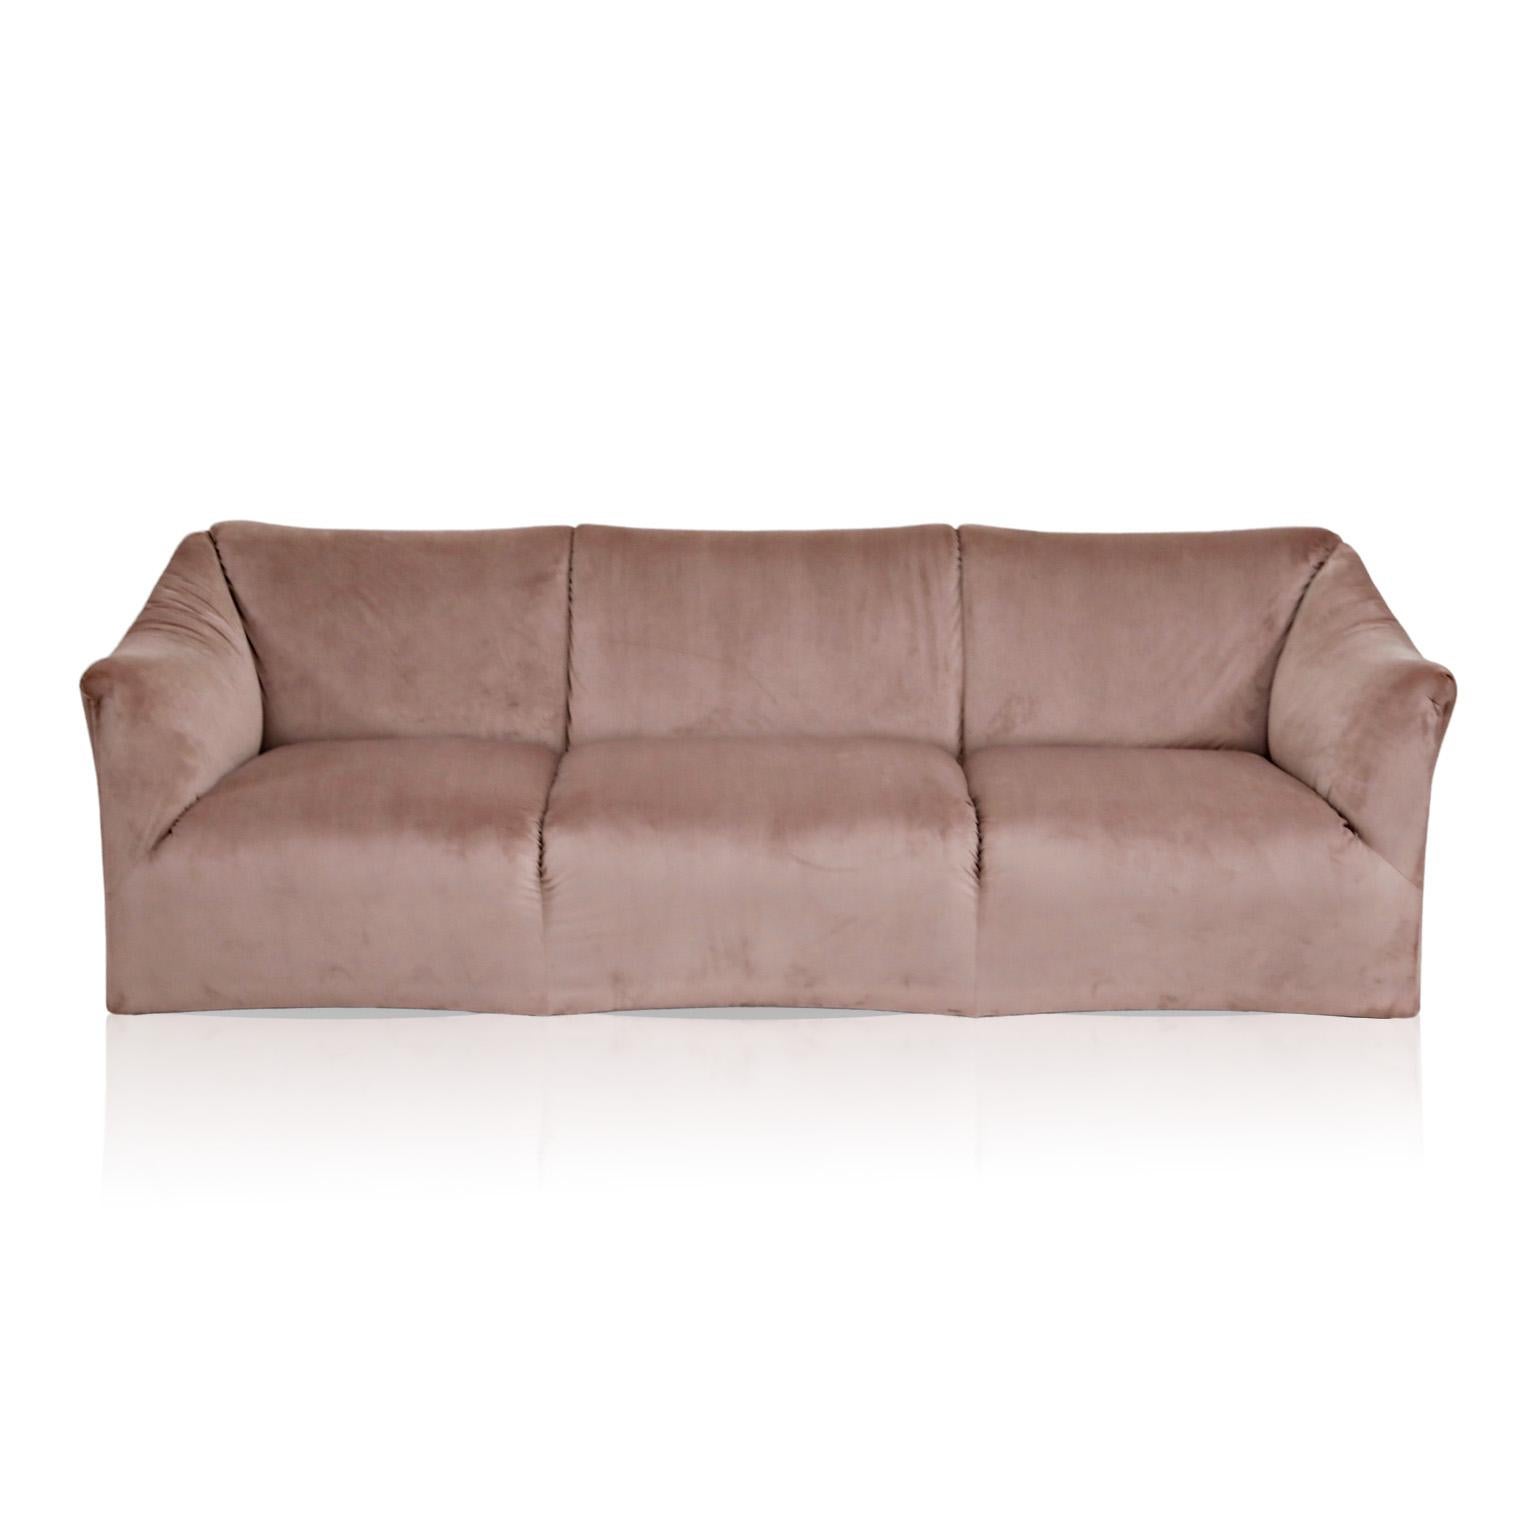 Place this incredible Tentazione sofa by Mario Bellini for Cassina into any room and immediately this will complete the area with its gorgeous soft velvet in a rose pink colorway and timeless classic style. We restored this sofa with a beautiful and